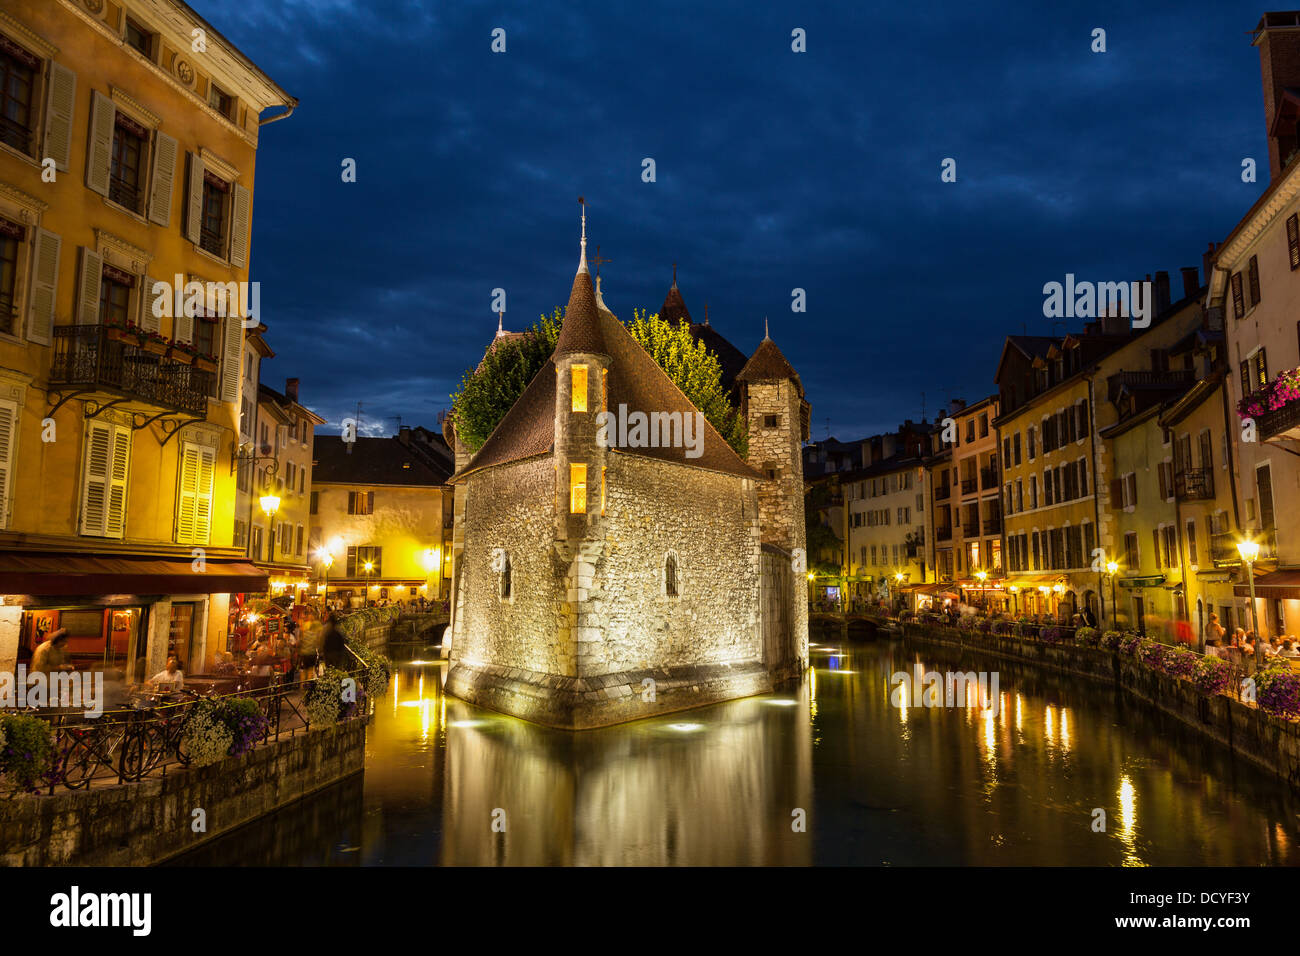 Palais de l'isle by night in Annecy - France Stock Photo